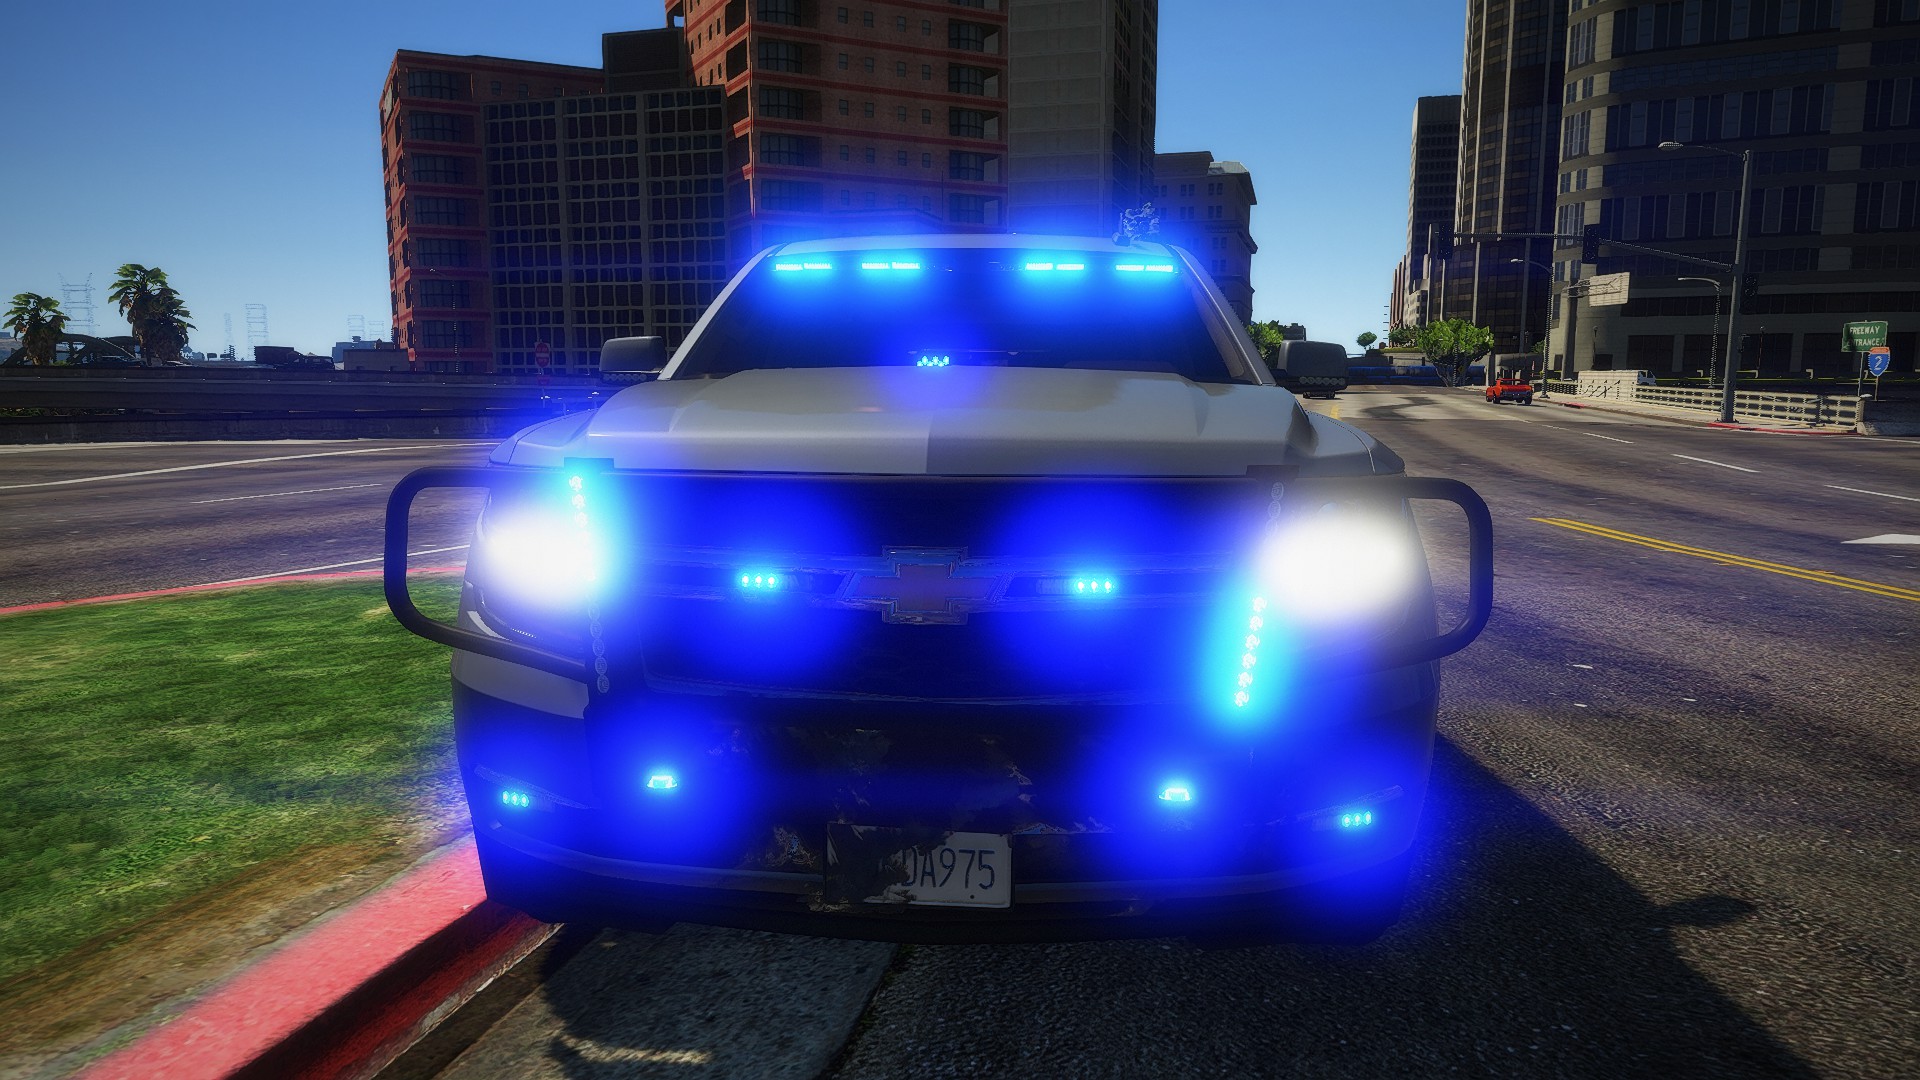 The Museum of Blue Lights (All blue police lighting) - & Data FIle Modifications - LCPDFR.com